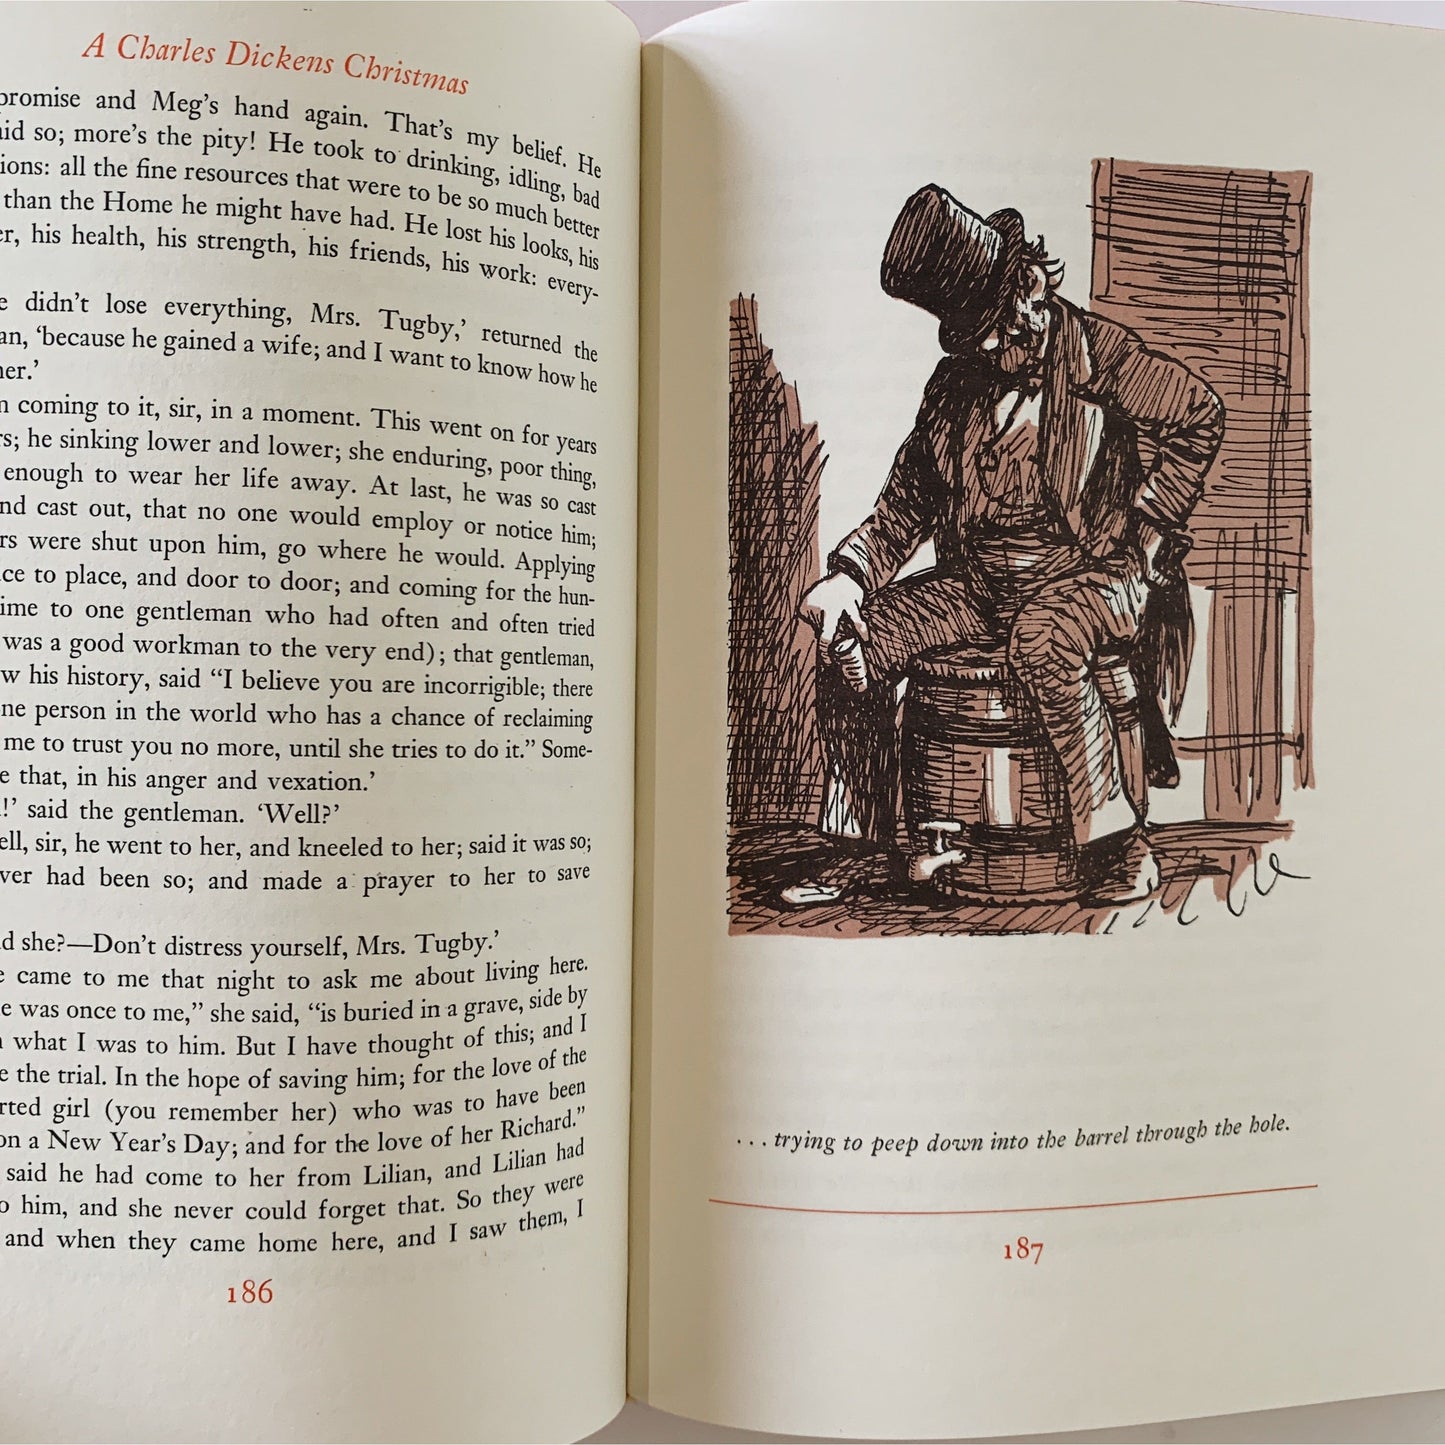 A Charles Dickens Christmas, 1976, Illustrated Hardcover